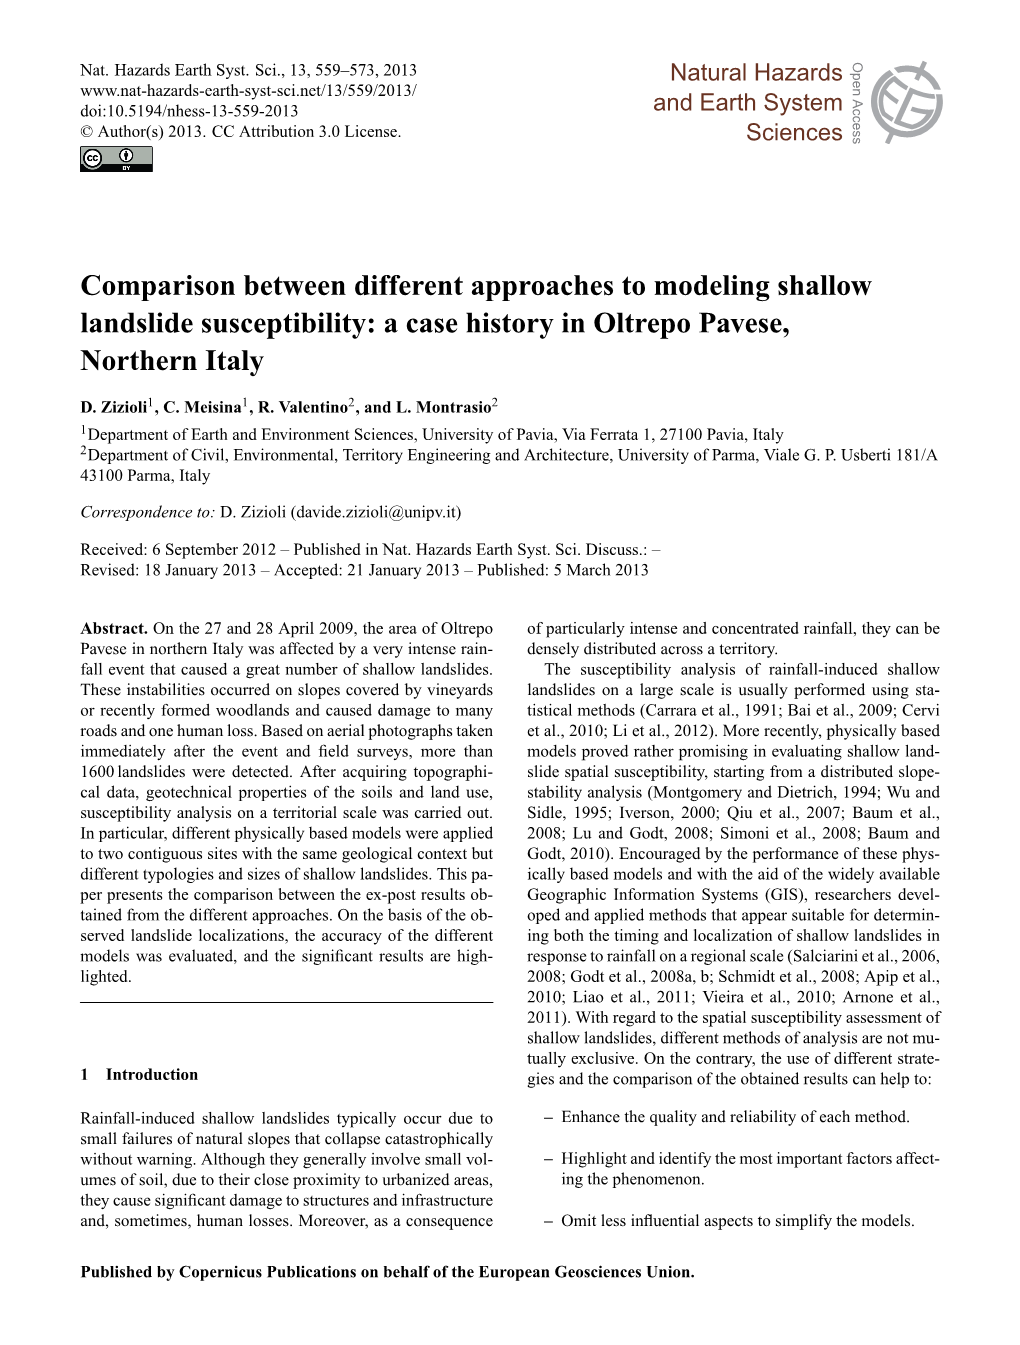 Comparison Between Different Approaches to Modeling Shallow